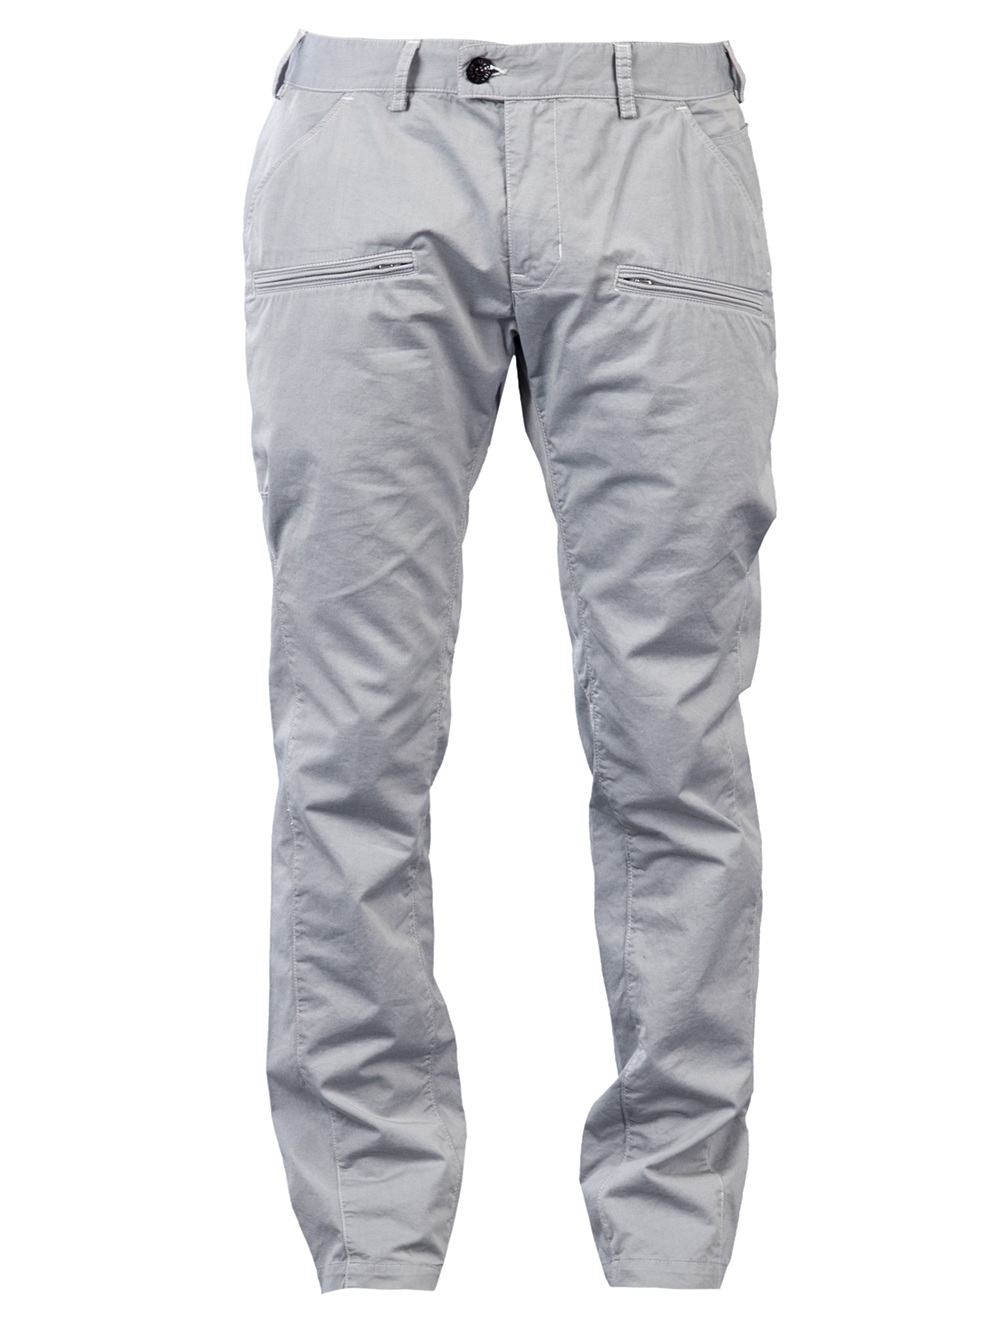 Lyst - Stone island Cargo Pant in Gray for Men